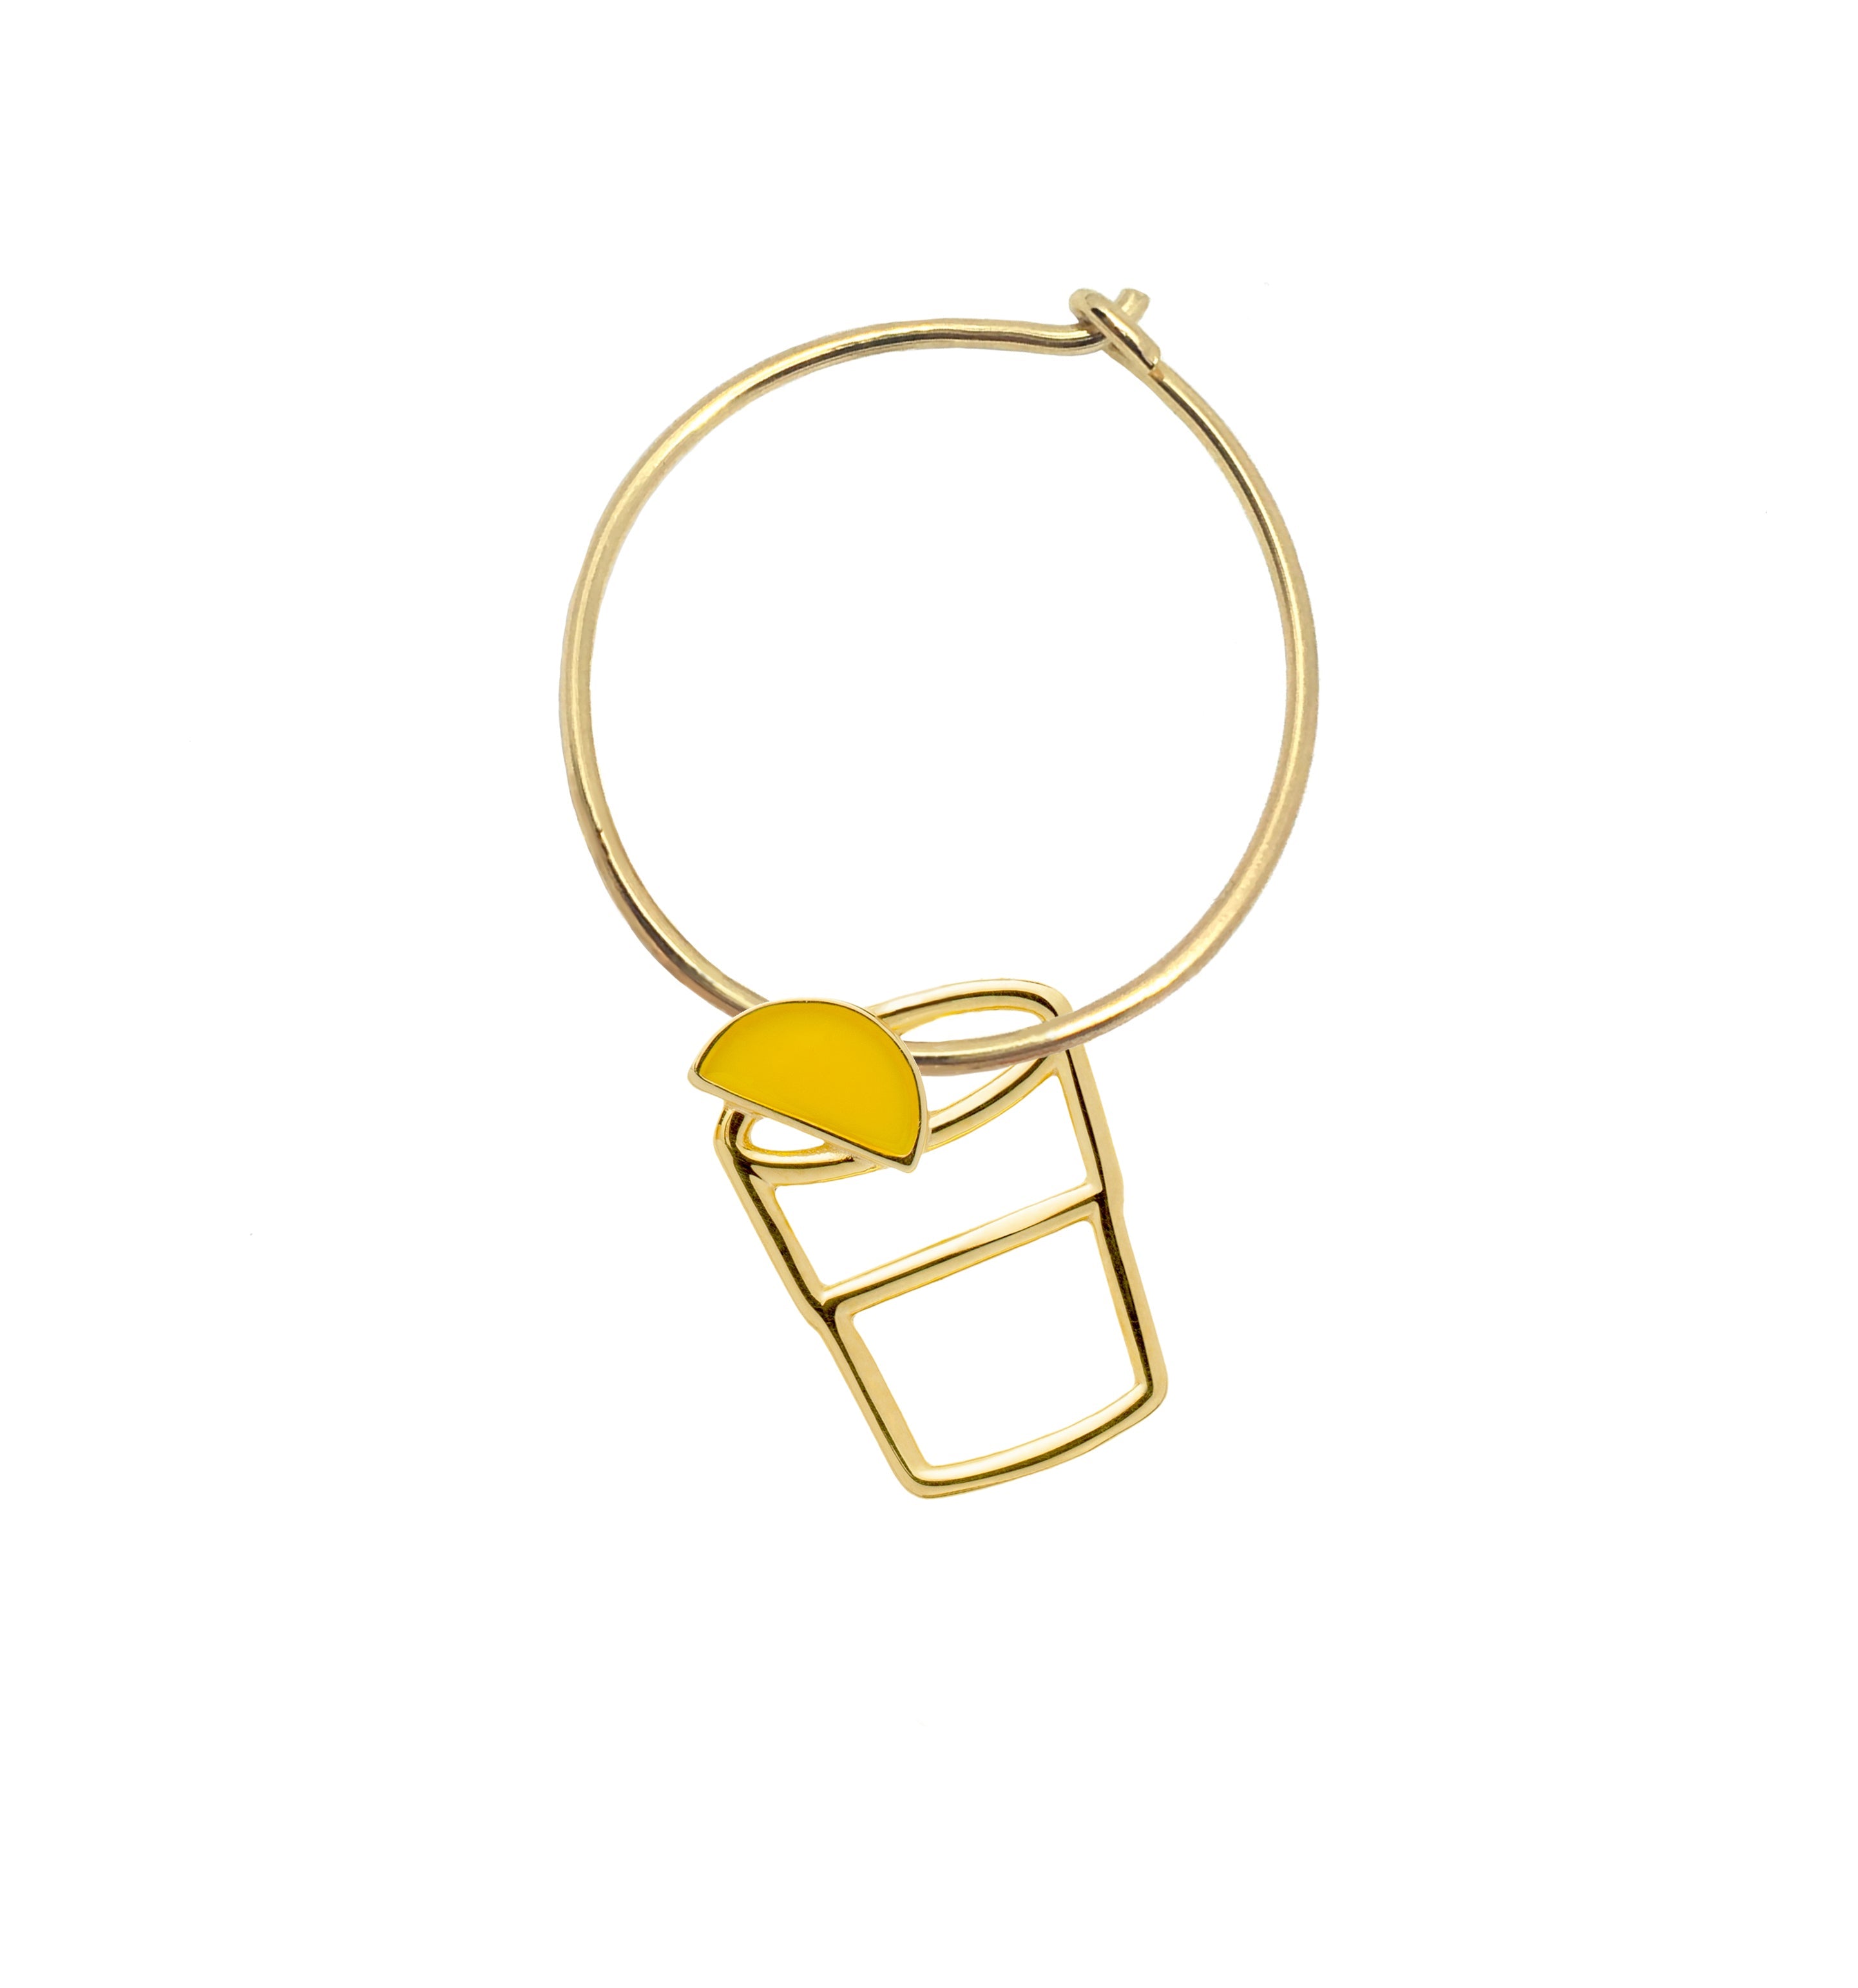 Gold earring circle with tequila shot shaped pendant